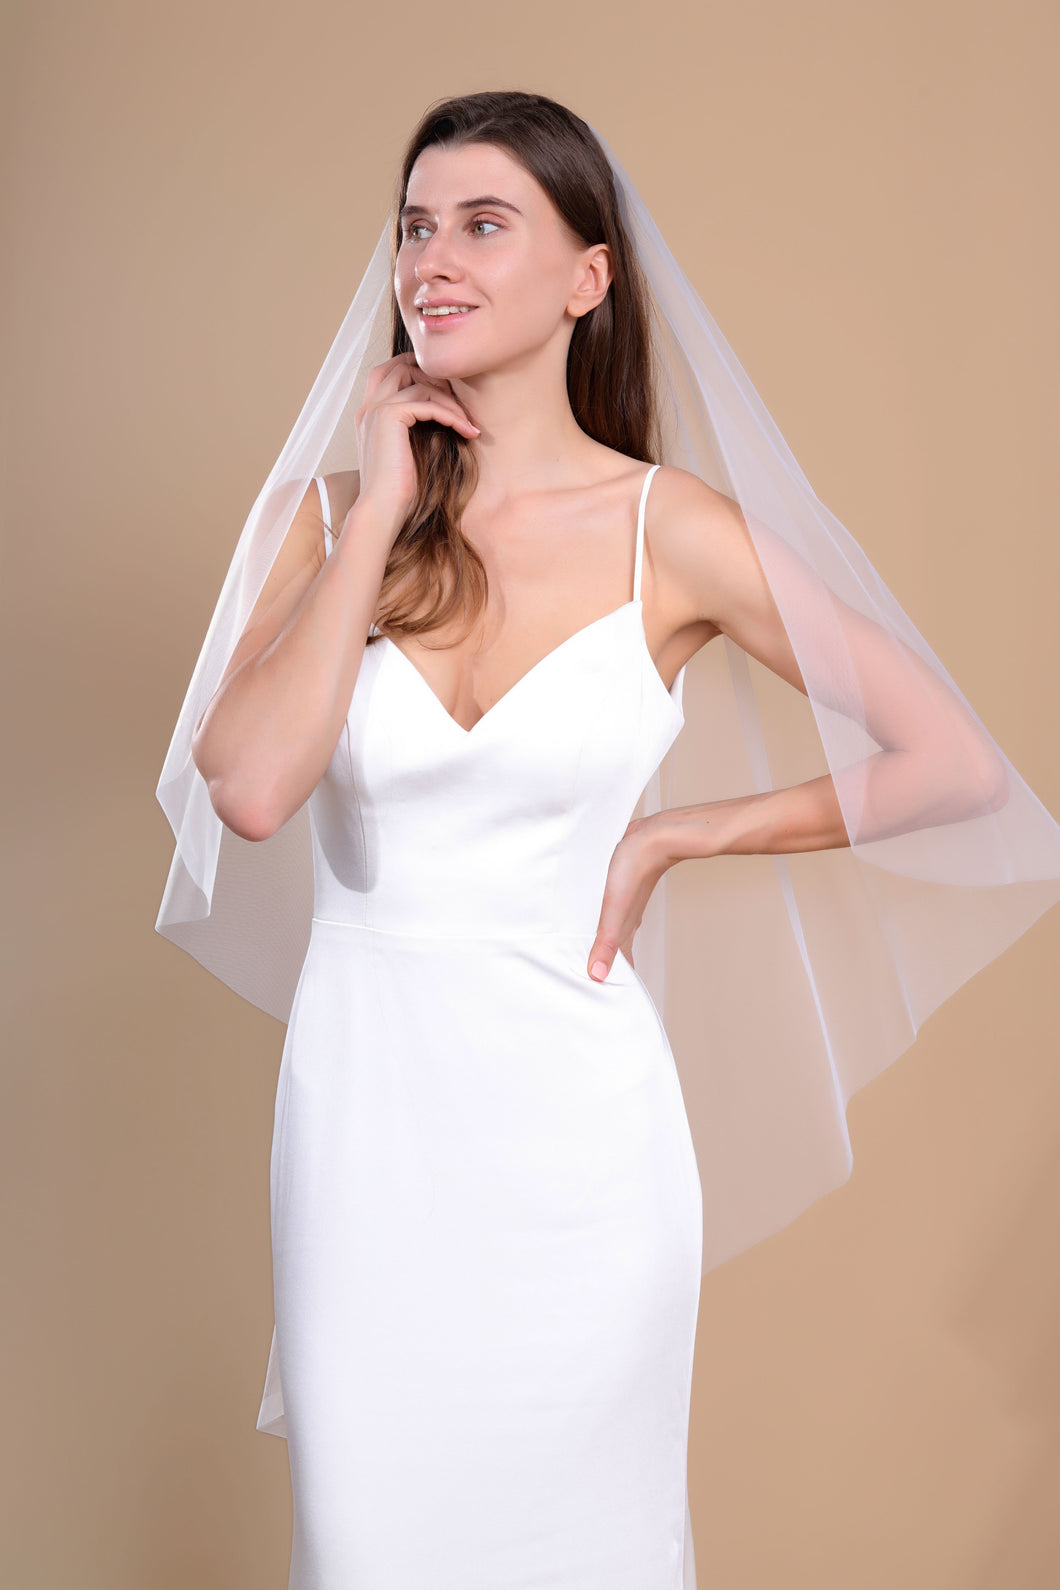 ISABELLA - one layer fingertip length barely-there cut veil in Italian style tulle